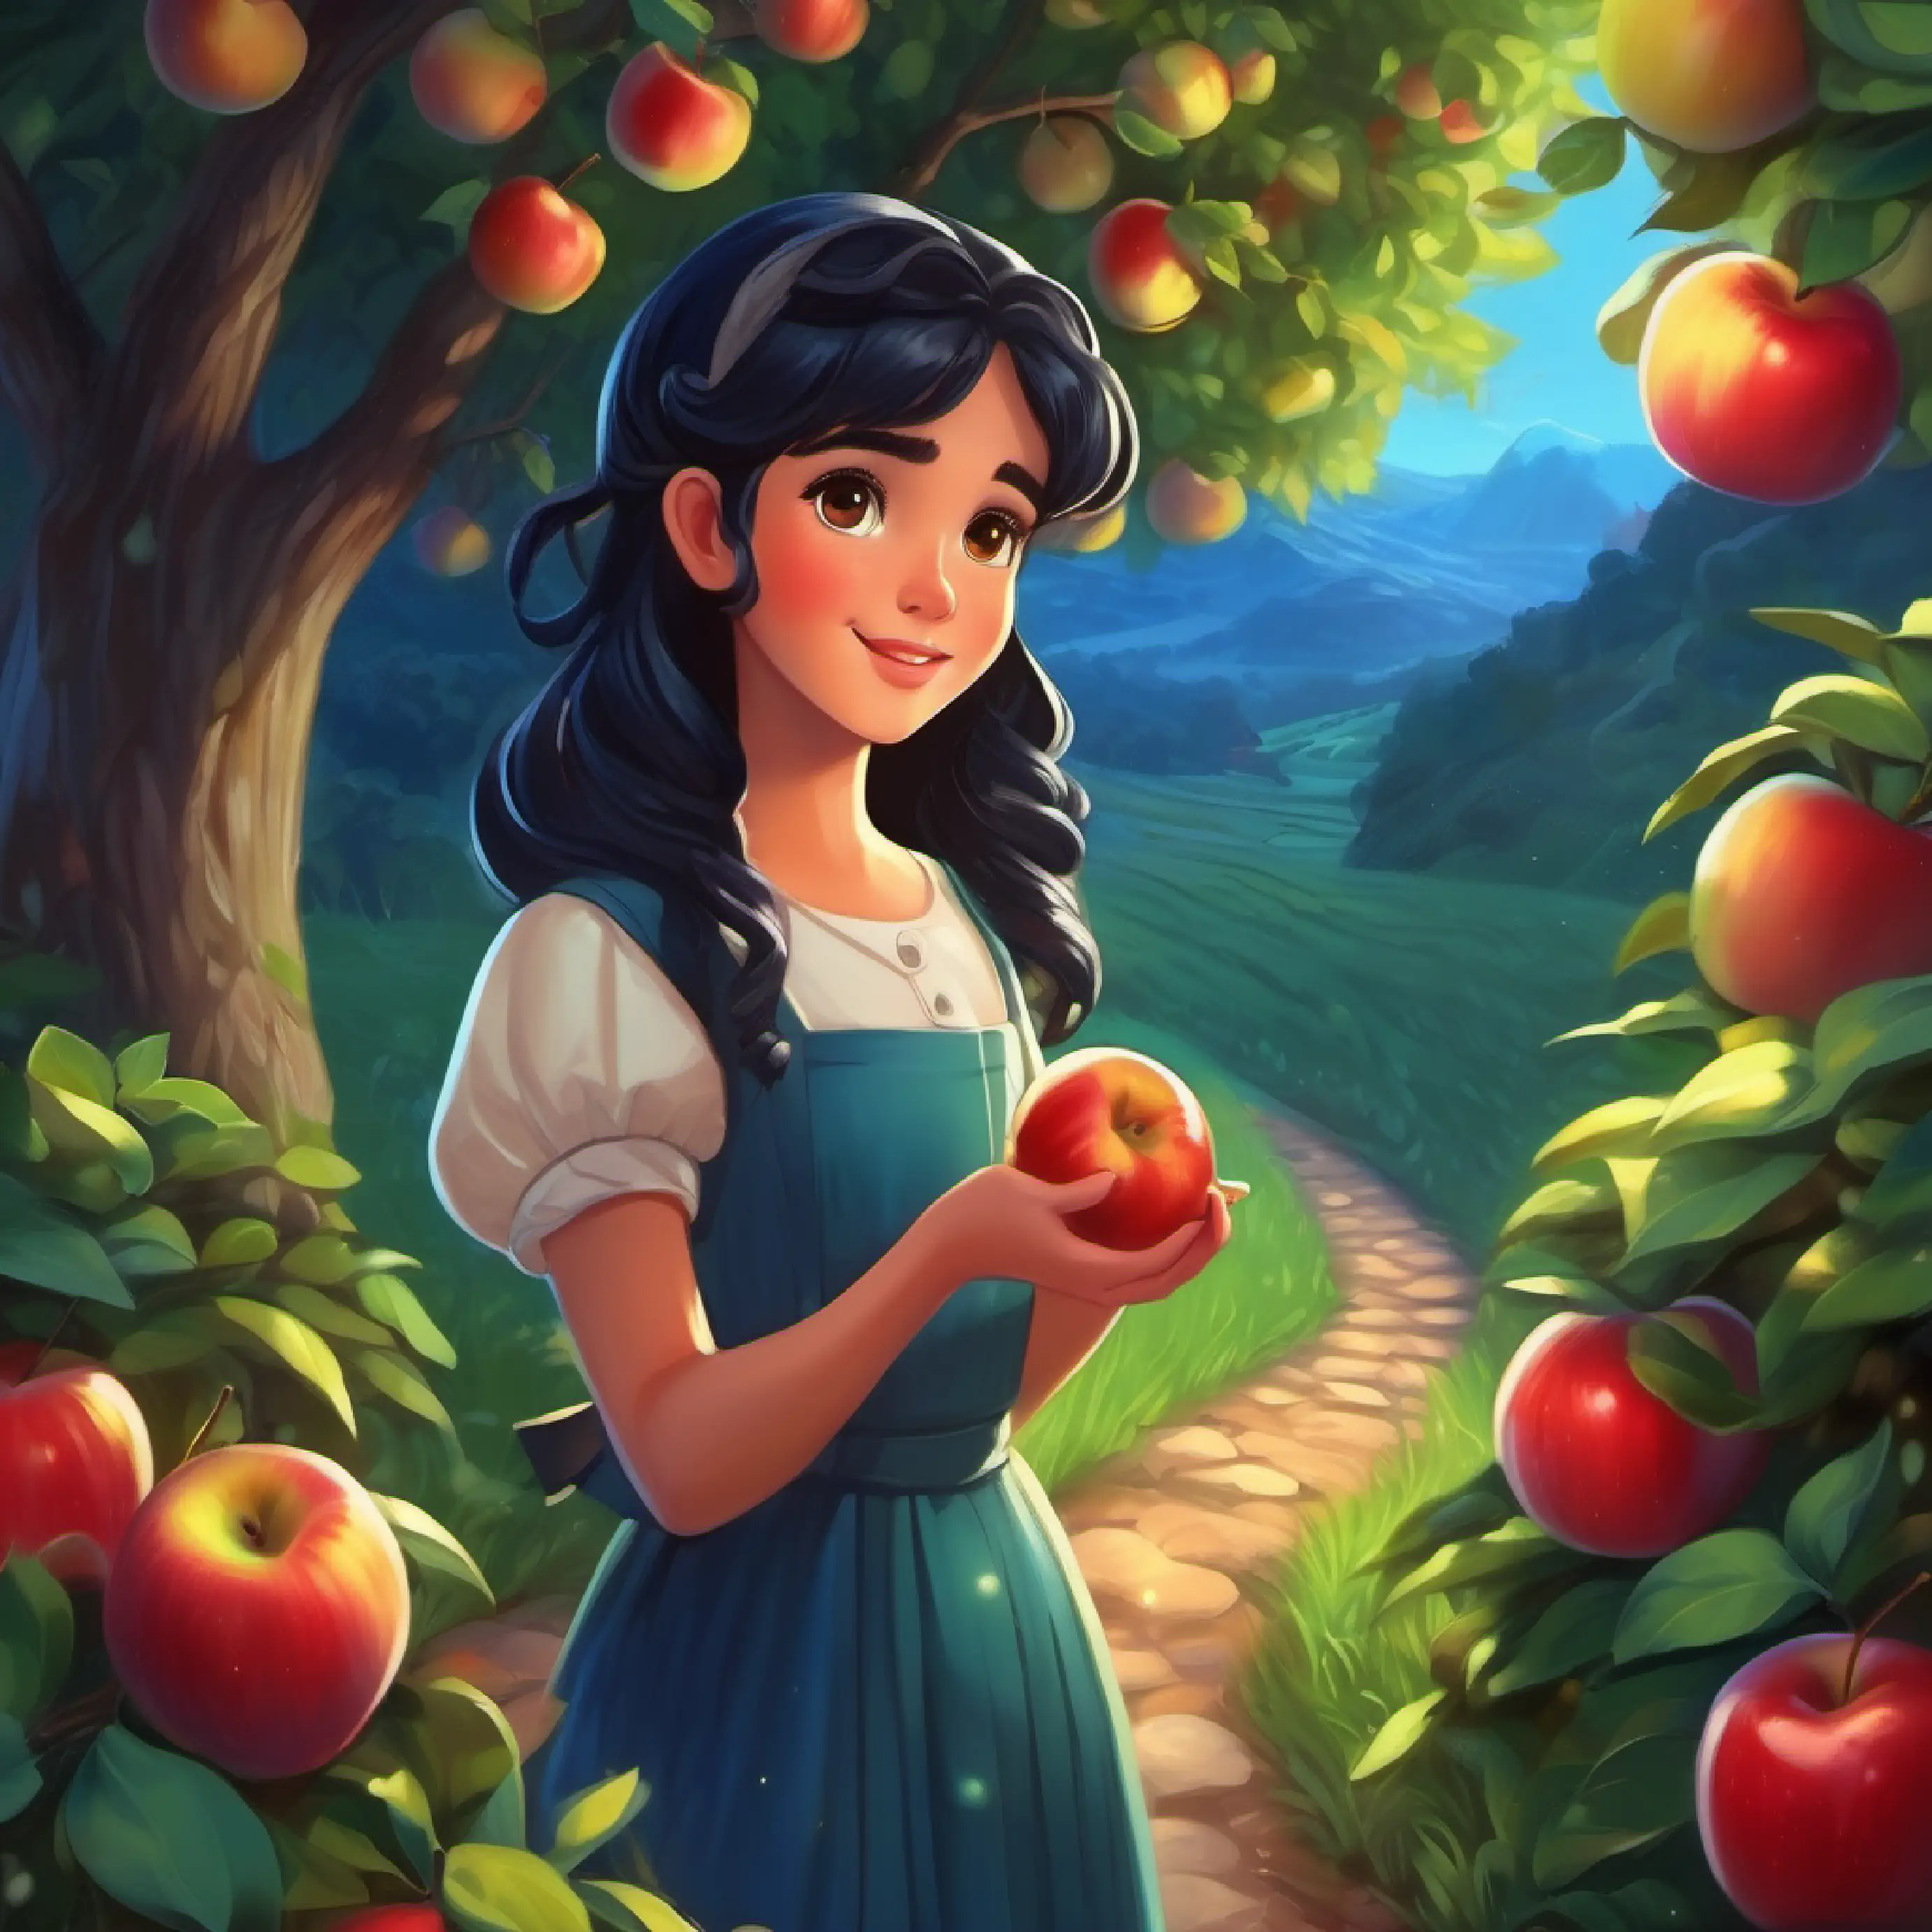 Curious girl, midnight hair, bright, sparkling eyes picks apples, path to glade is revealed.